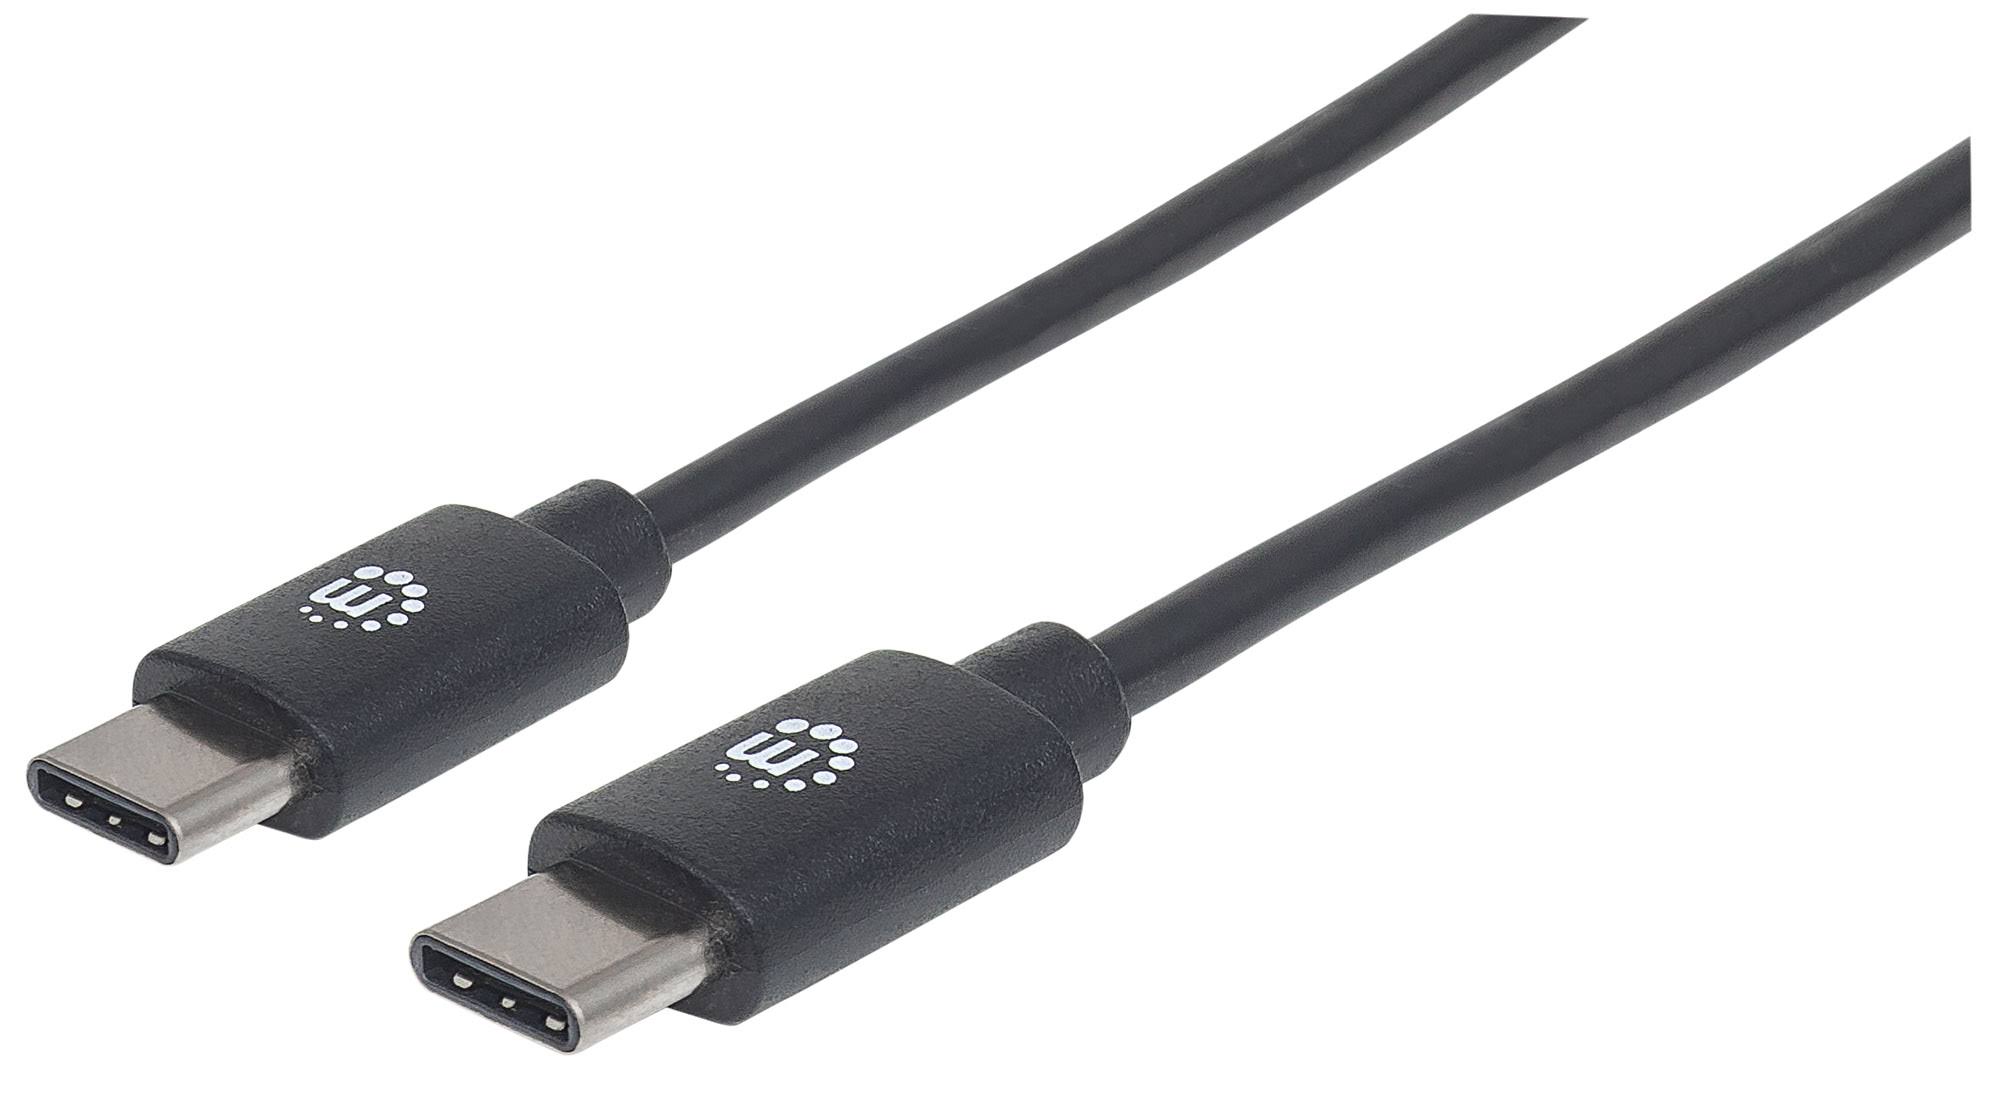 Manhattan USB-C Male to USB-C Male Cable - Black, 6ft